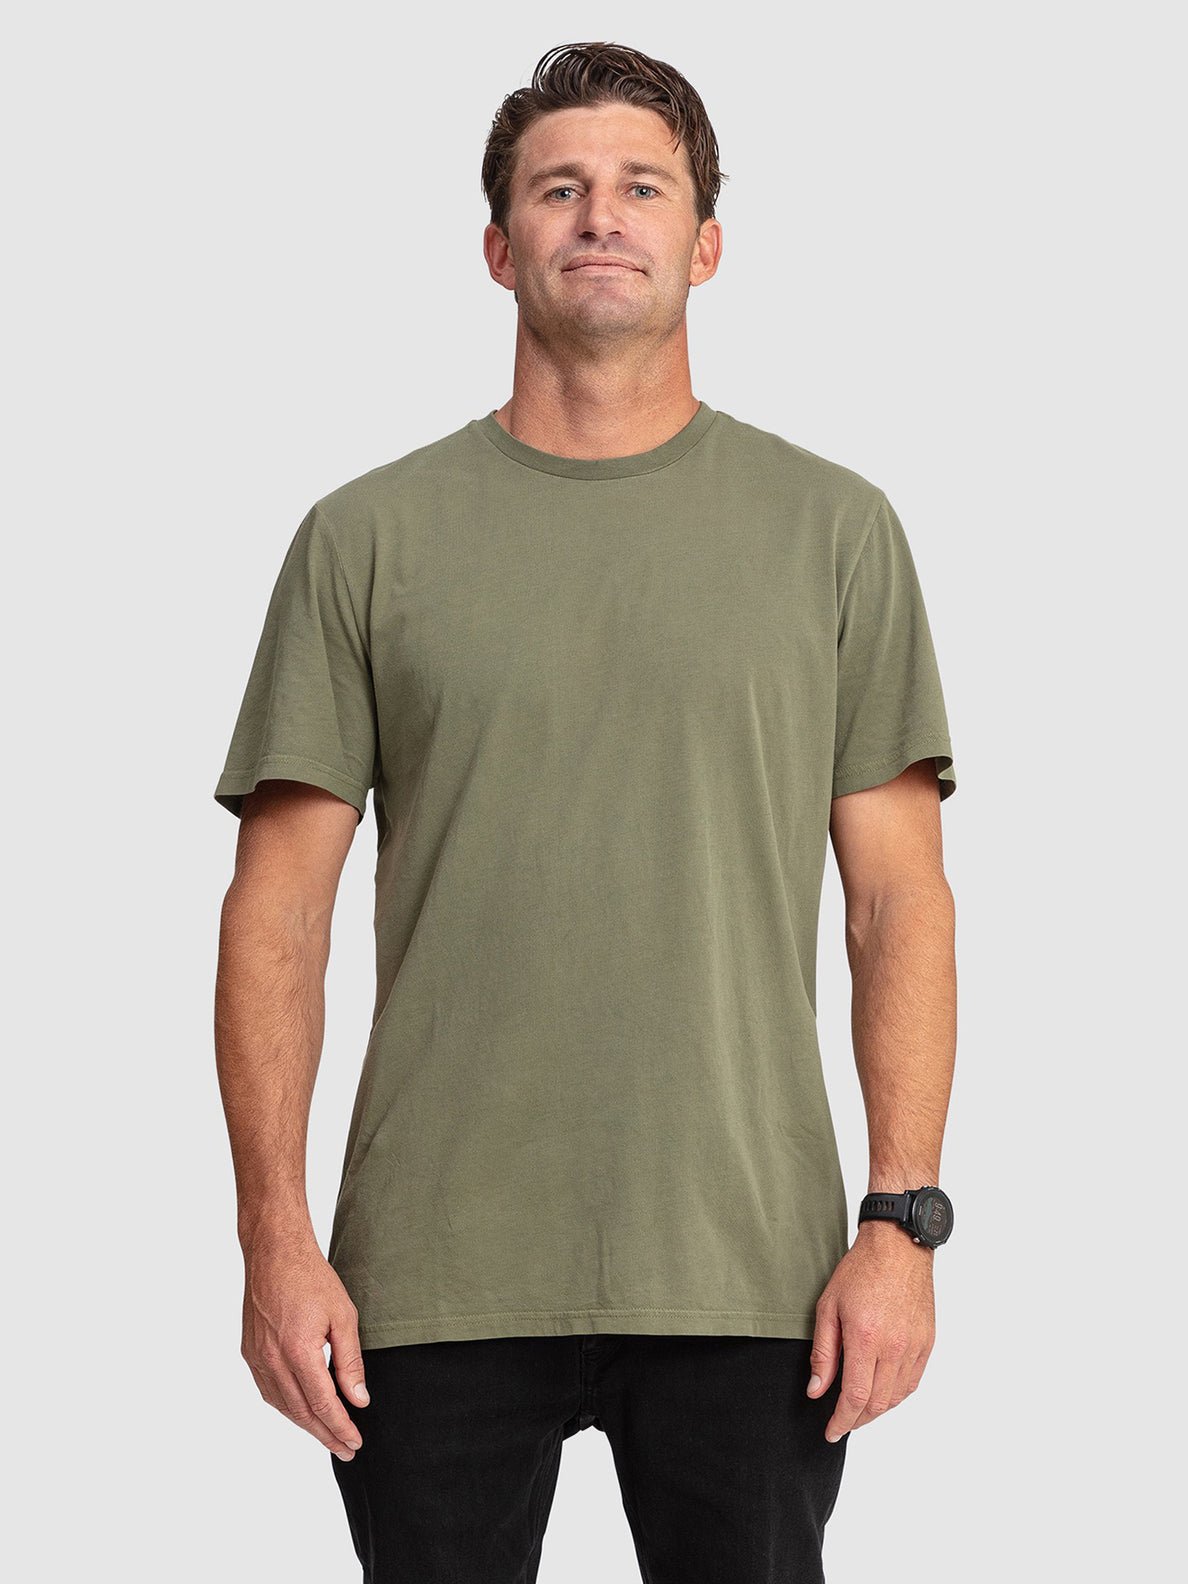 AUS WASH SS TEE -VolcomA4332275-ARMY GREEN COMBO-S